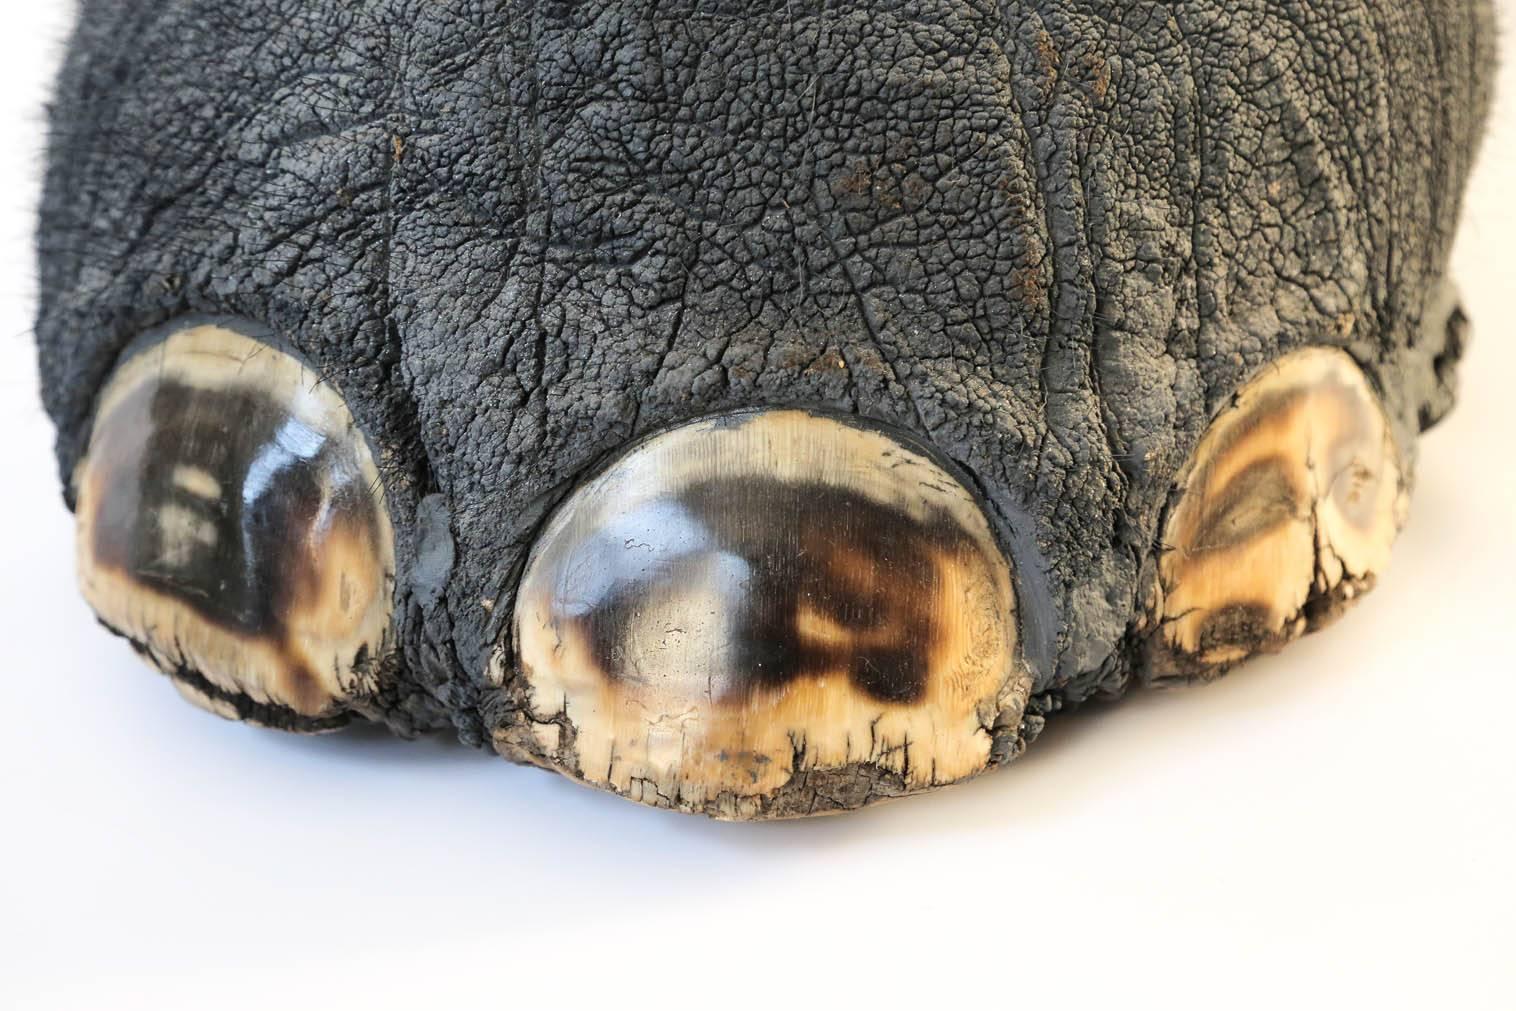 An unique taxidermy African elephant's foot commonly used as a umbrella or cane Stand. Its leather is in excellent condition with great taxidermy work by Belgian expert taxidermist J-P. Gérard-Simon S.A, complete with nails and hair. Even the